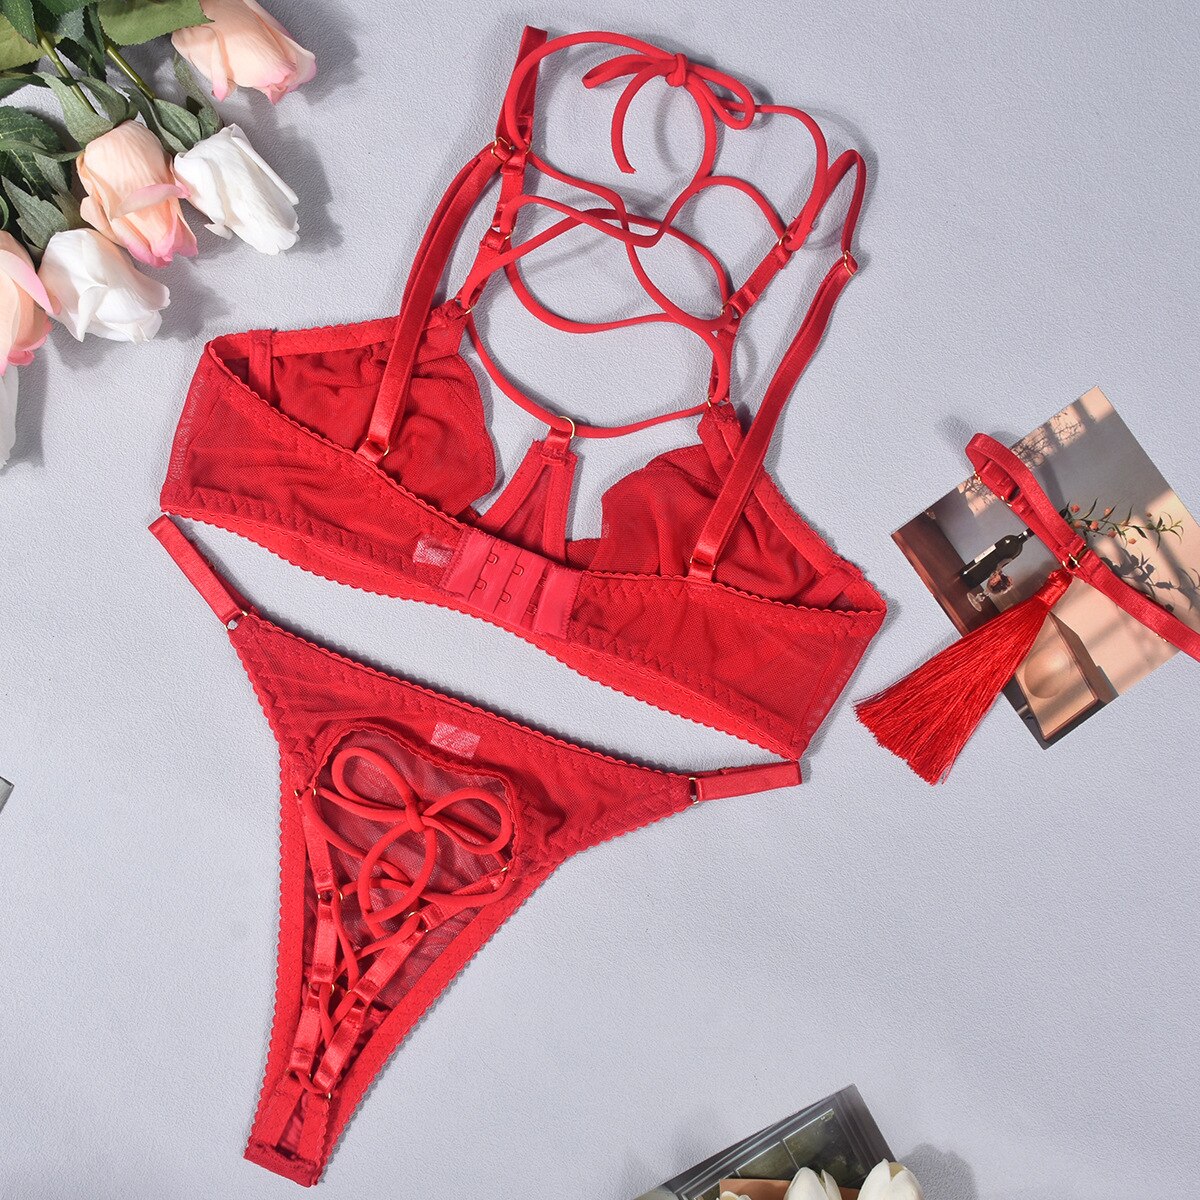 Ellolace Sexy Lingerie Bangdage Bra Brief Set Lace Underwear Women Fancy Tassels Bra Kit Push Up Outfit Seamless Red Exotic Sets